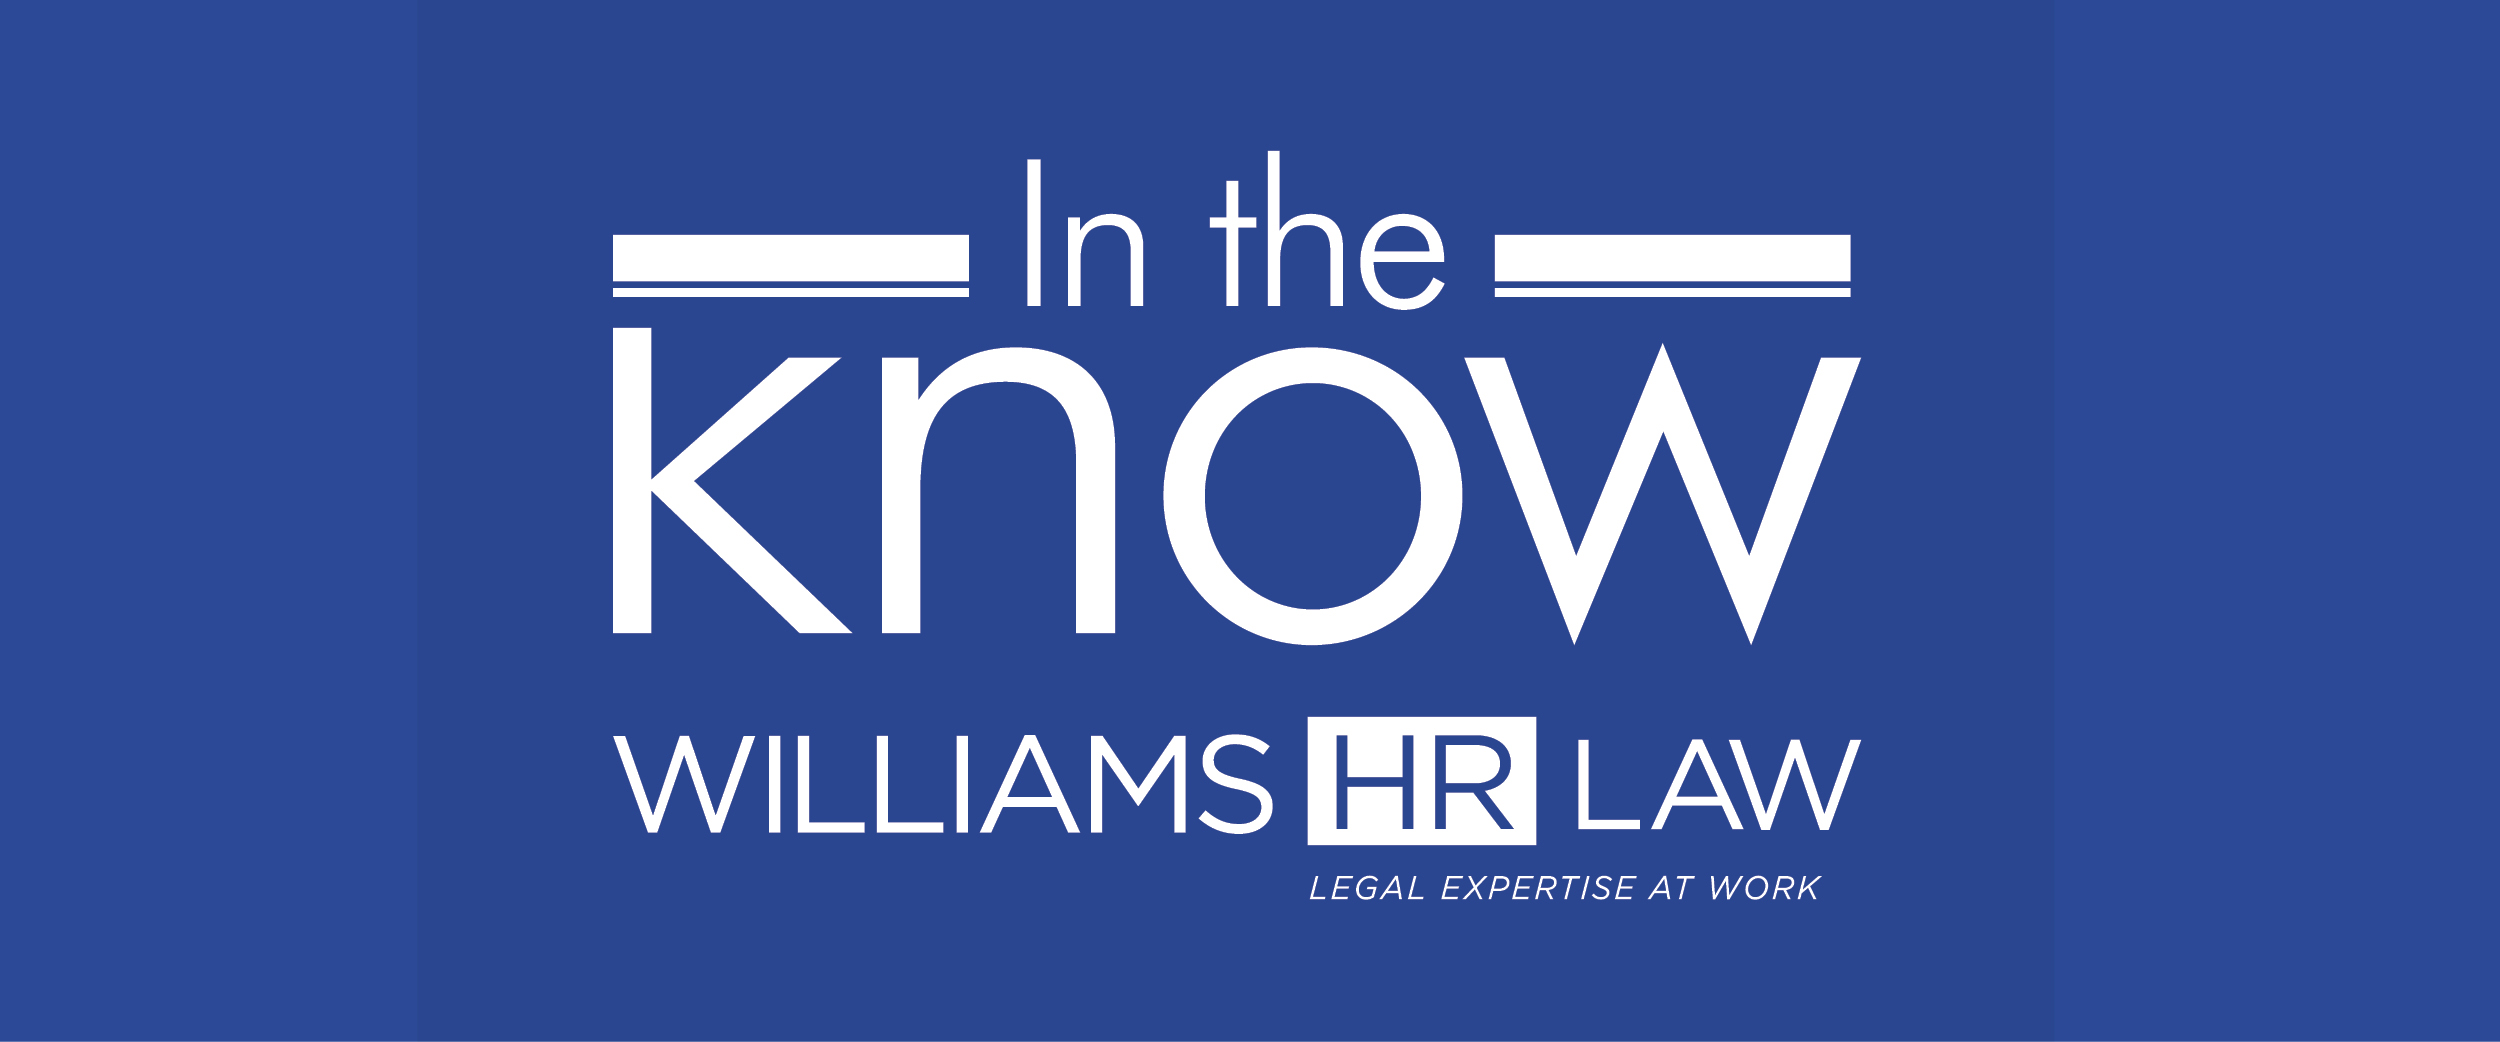 When Legislation Collides: How can Employers Balance Competing Legislative Obligations in the Workplace?